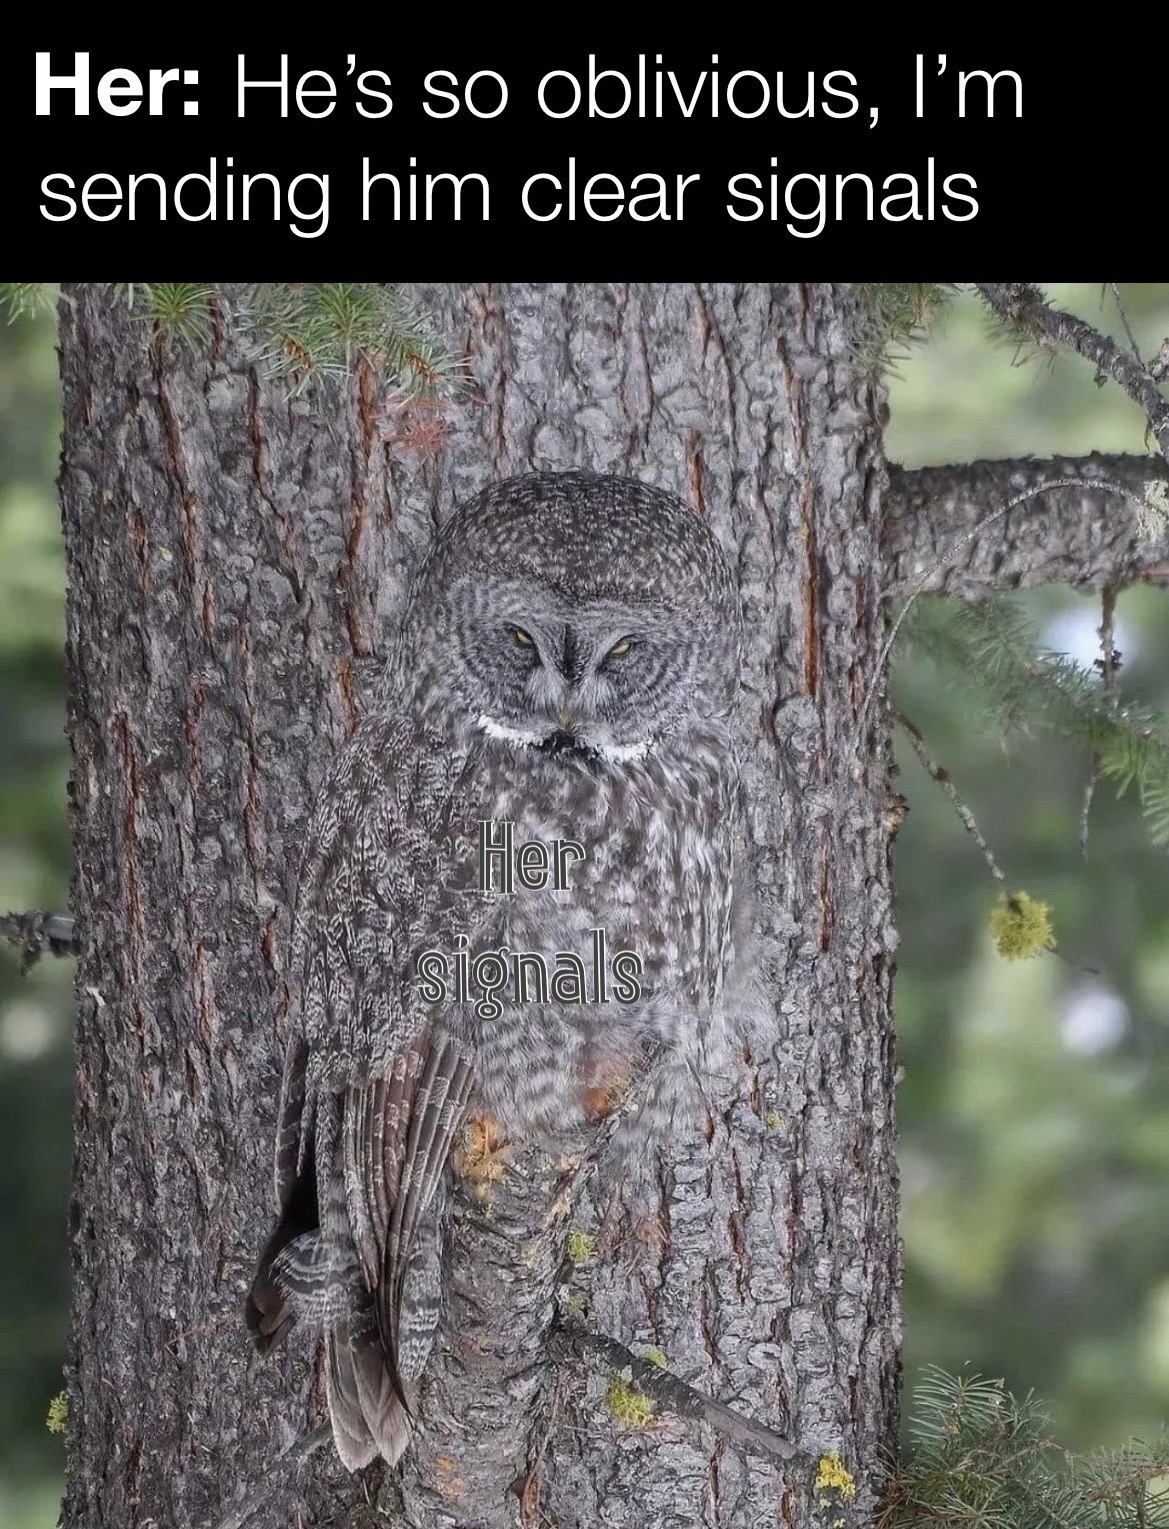 dank memes - owl in camouflage - Her He's so oblivious, I'm sending him clear signals signals